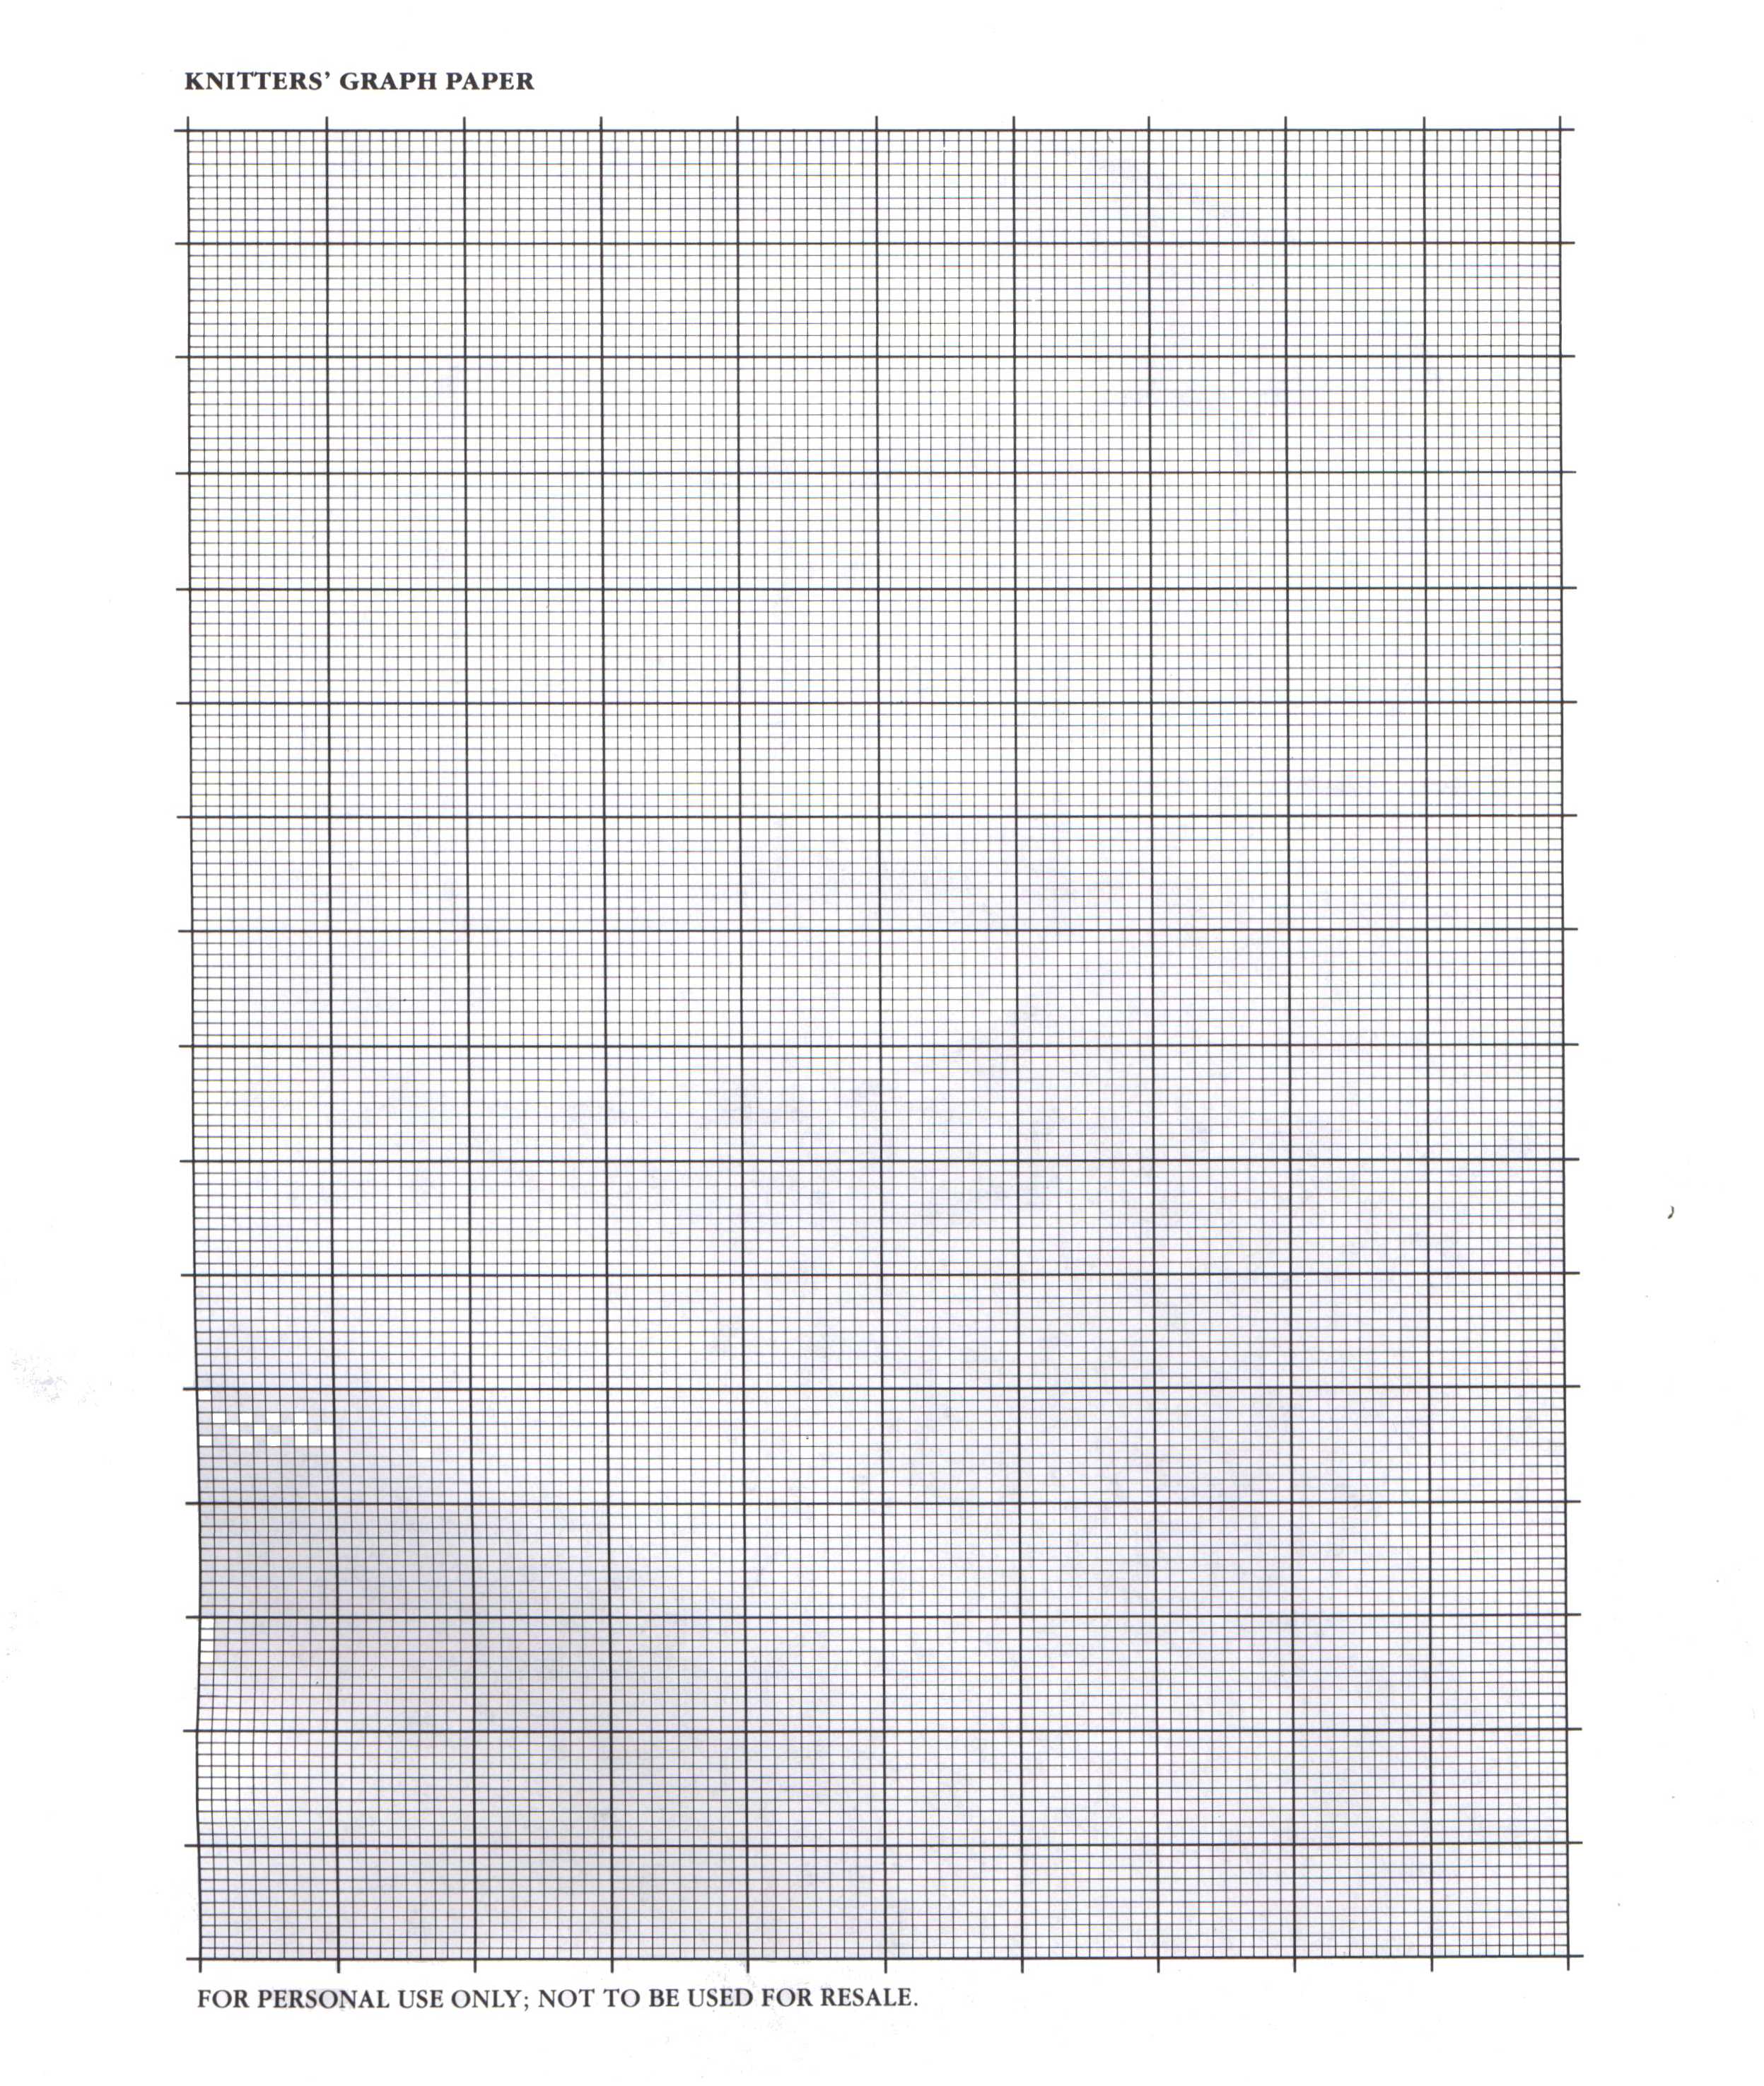 Knitter's Graph Paper Knitting patterns, Graph paper